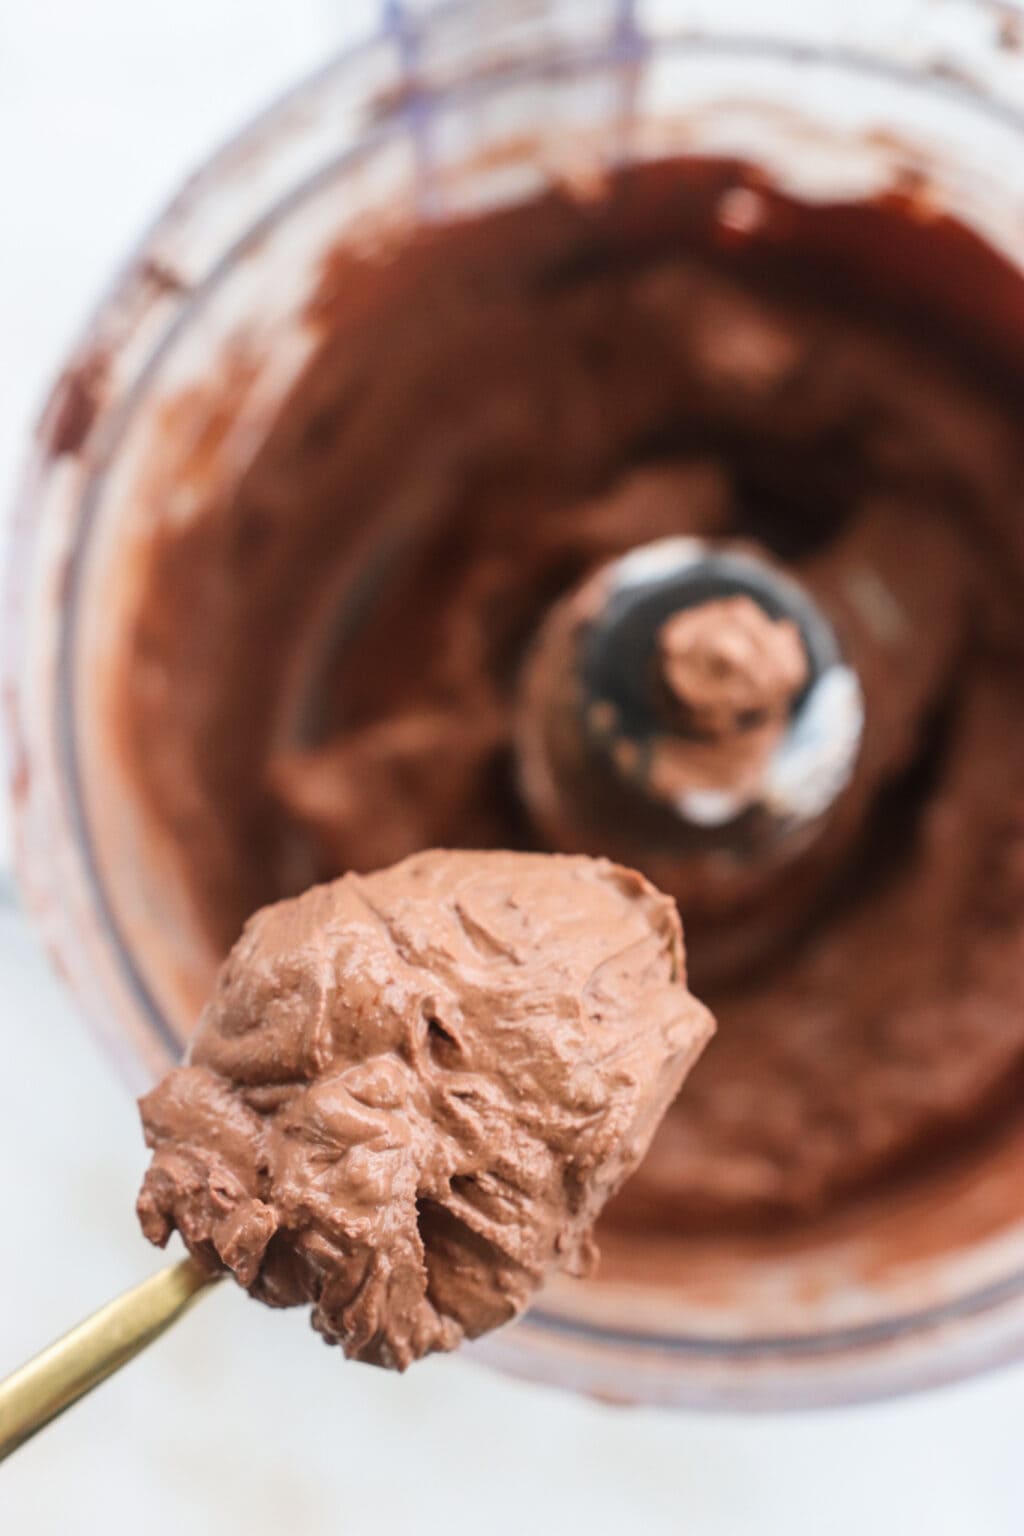 Ingredients for Whipped Greek Yogurt Chocolate Mousse blended in a food processor, including chocolate chips, Greek yogurt, cacao and salt